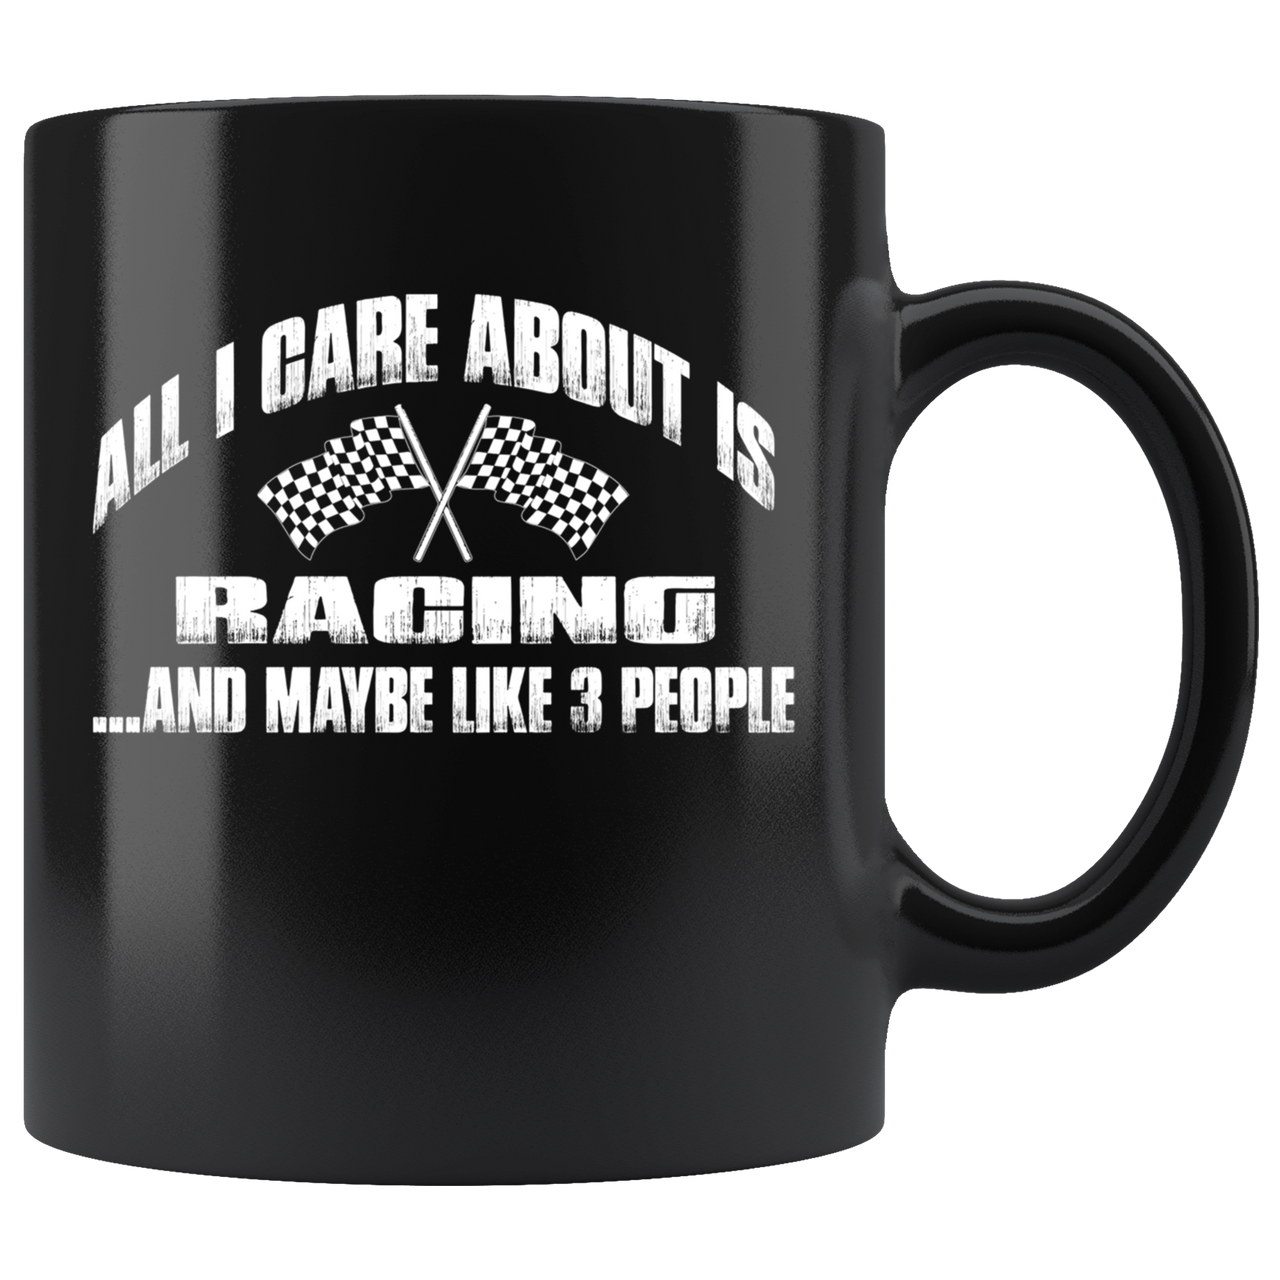 All I Care About Is Racing... And Maybe Like 3 People Mug!